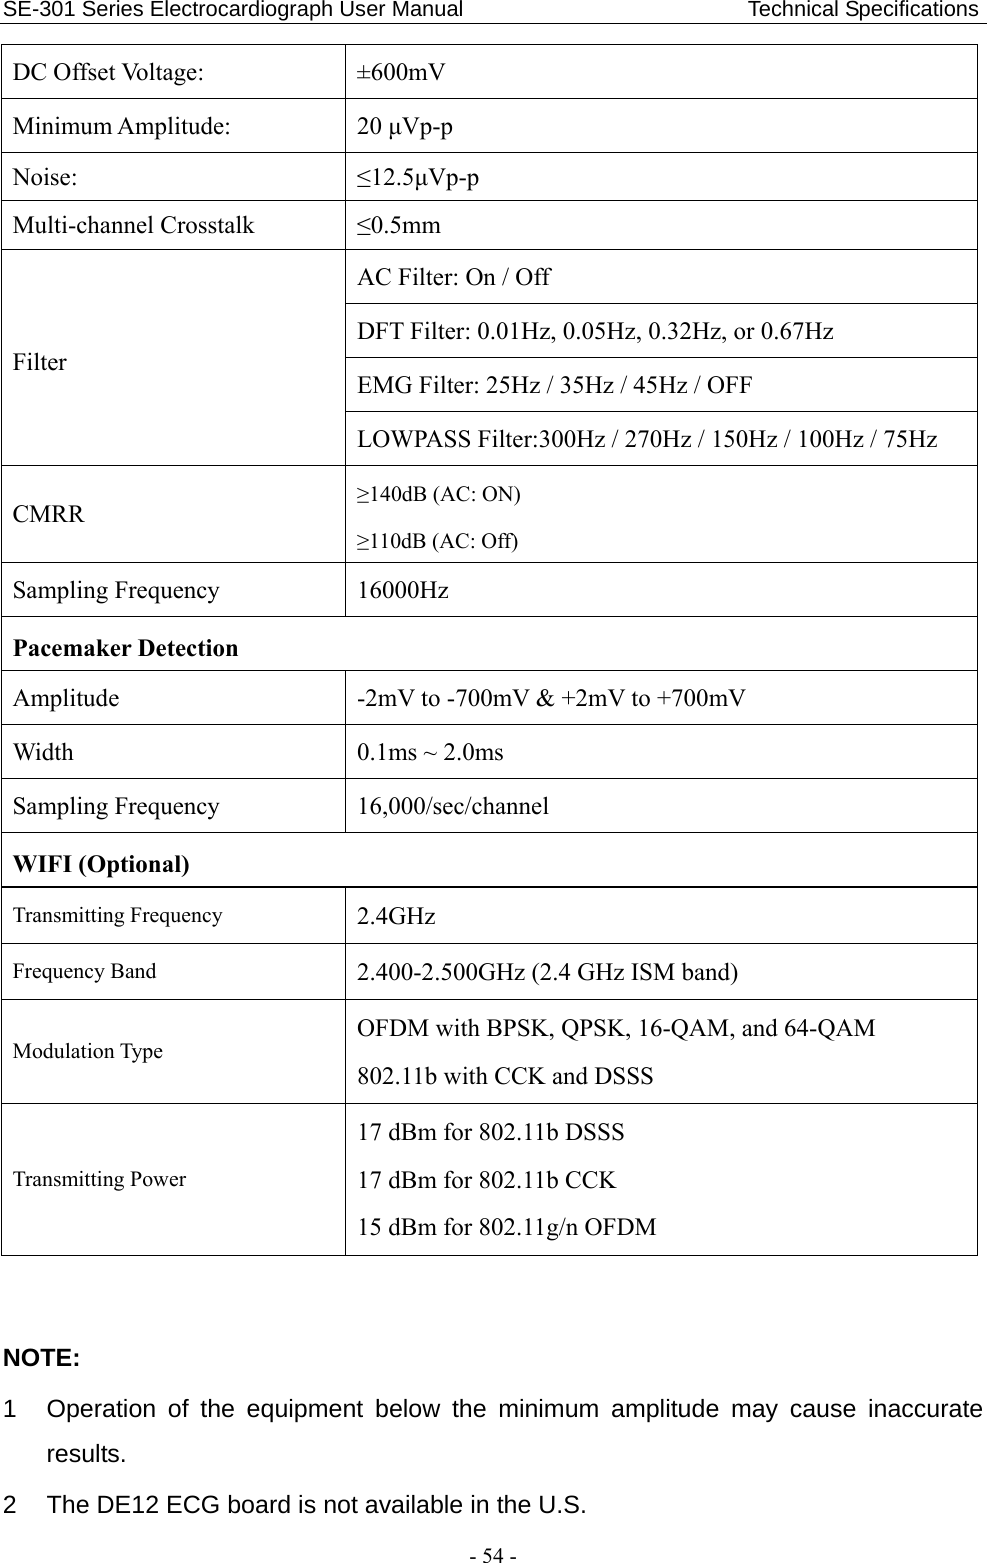 SE-301 Series Electrocardiograph User Manual                          Technical Specifications - 54 - DC Offset Voltage:  ±600mV Minimum Amplitude:  20 μVp-p Noise:  ≤12.5μVp-p Multi-channel Crosstalk  ≤0.5mm Filter AC Filter: On / Off   DFT Filter: 0.01Hz, 0.05Hz, 0.32Hz, or 0.67Hz EMG Filter: 25Hz / 35Hz / 45Hz / OFF LOWPASS Filter:300Hz / 270Hz / 150Hz / 100Hz / 75Hz CMRR  ≥140dB (AC: ON) ≥110dB (AC: Off) Sampling Frequency  16000Hz Pacemaker Detection Amplitude  -2mV to -700mV &amp; +2mV to +700mV Width  0.1ms ~ 2.0ms Sampling Frequency  16,000/sec/channel WIFI (Optional) Transmitting Frequency  2.4GHz Frequency Band  2.400-2.500GHz (2.4 GHz ISM band) Modulation Type OFDM with BPSK, QPSK, 16-QAM, and 64-QAM 802.11b with CCK and DSSS Transmitting Power 17 dBm for 802.11b DSSS 17 dBm for 802.11b CCK 15 dBm for 802.11g/n OFDM  NOTE:  1  Operation of the equipment below the minimum amplitude may cause inaccurate results. 2  The DE12 ECG board is not available in the U.S. 